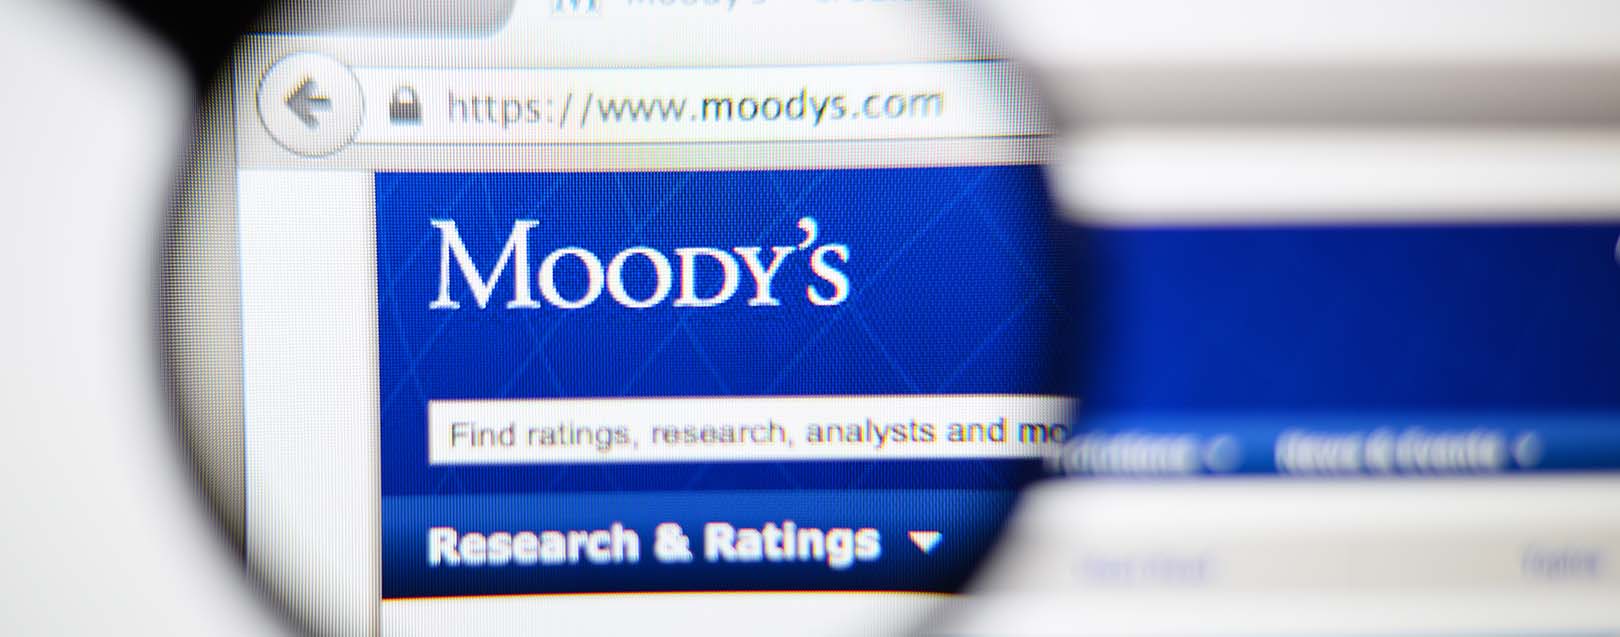 Issue of PSLCs is good for banks: Moody's